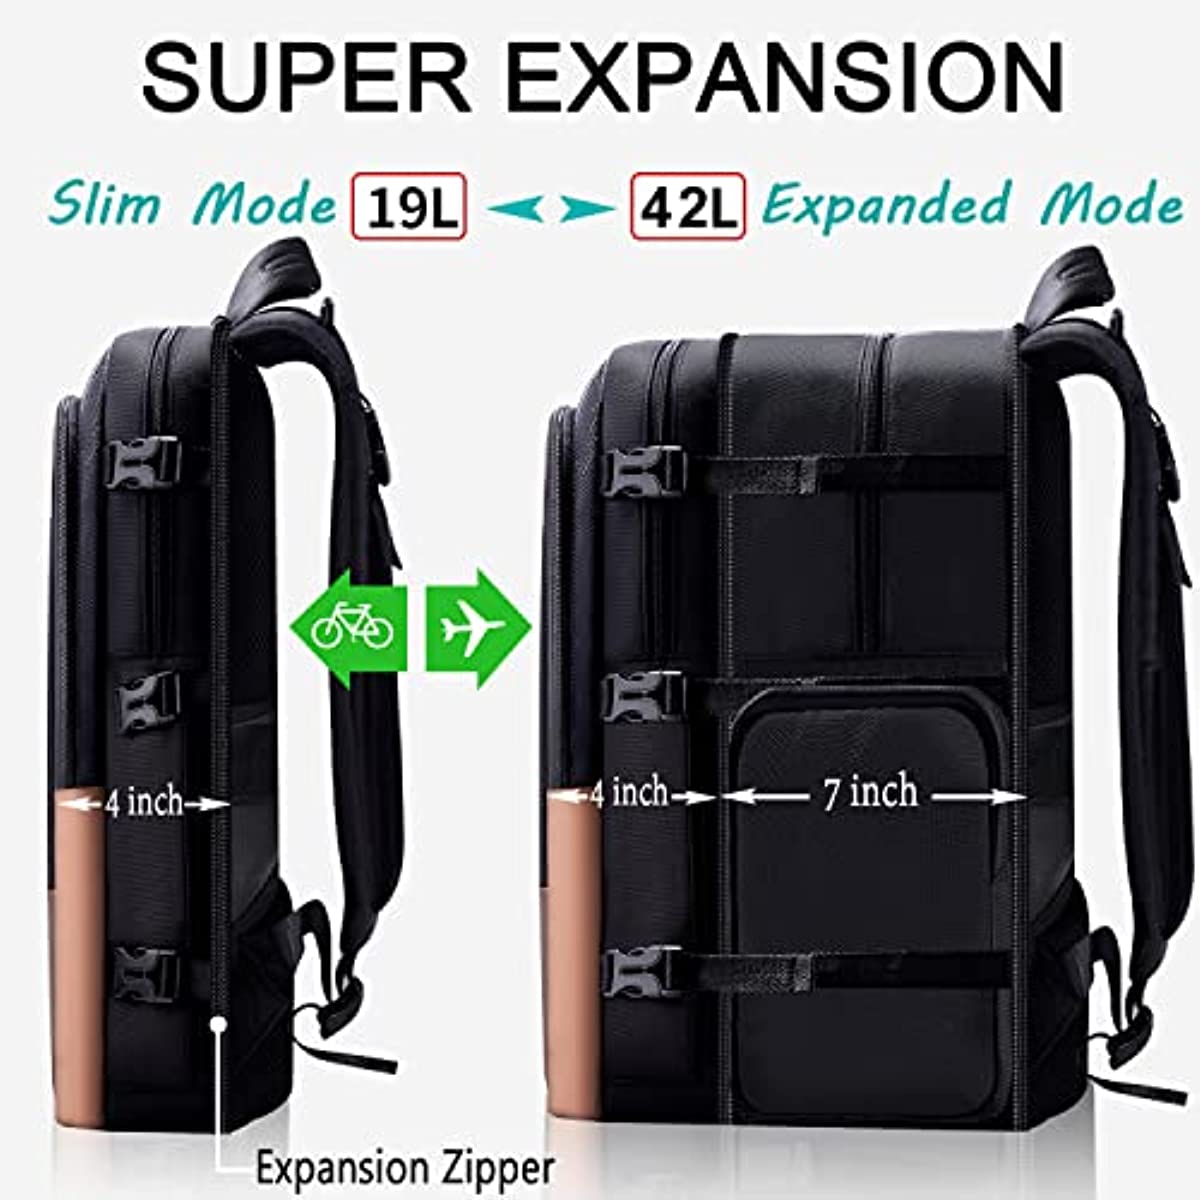 ZINZ Slim Expandable Travel Laptop Backpack 15.6 Inch with Patented Shoulder Pockets and USB, Versatile Anti-Theft Business Backpack Daypack with Ultra Capacity for Work/School/Hiking/Camping,Black